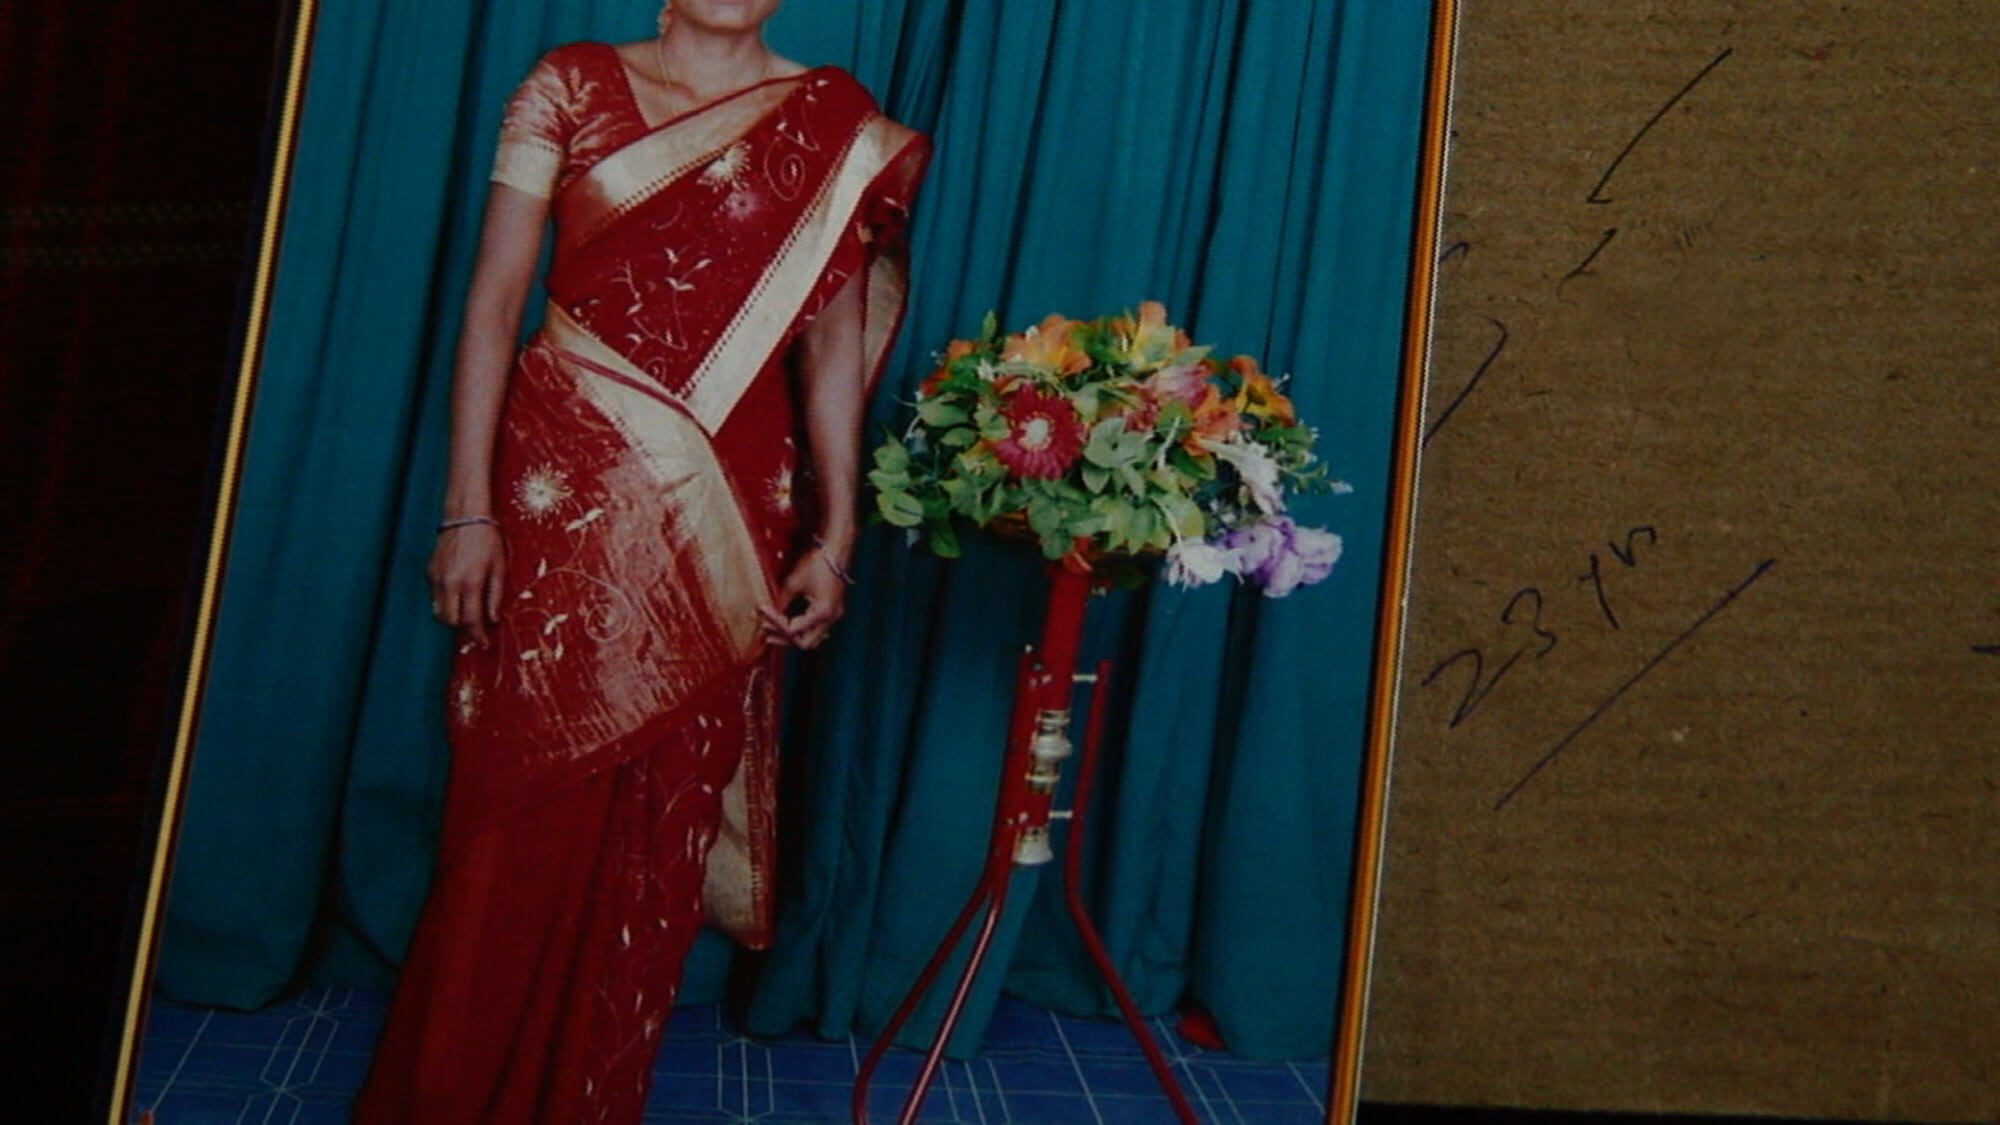 A framed portrait of a woman in a red sari standing beside a bouquet of flowers placed on a cardboard surface with handwriting that says "23 yr" to the right of the frame.